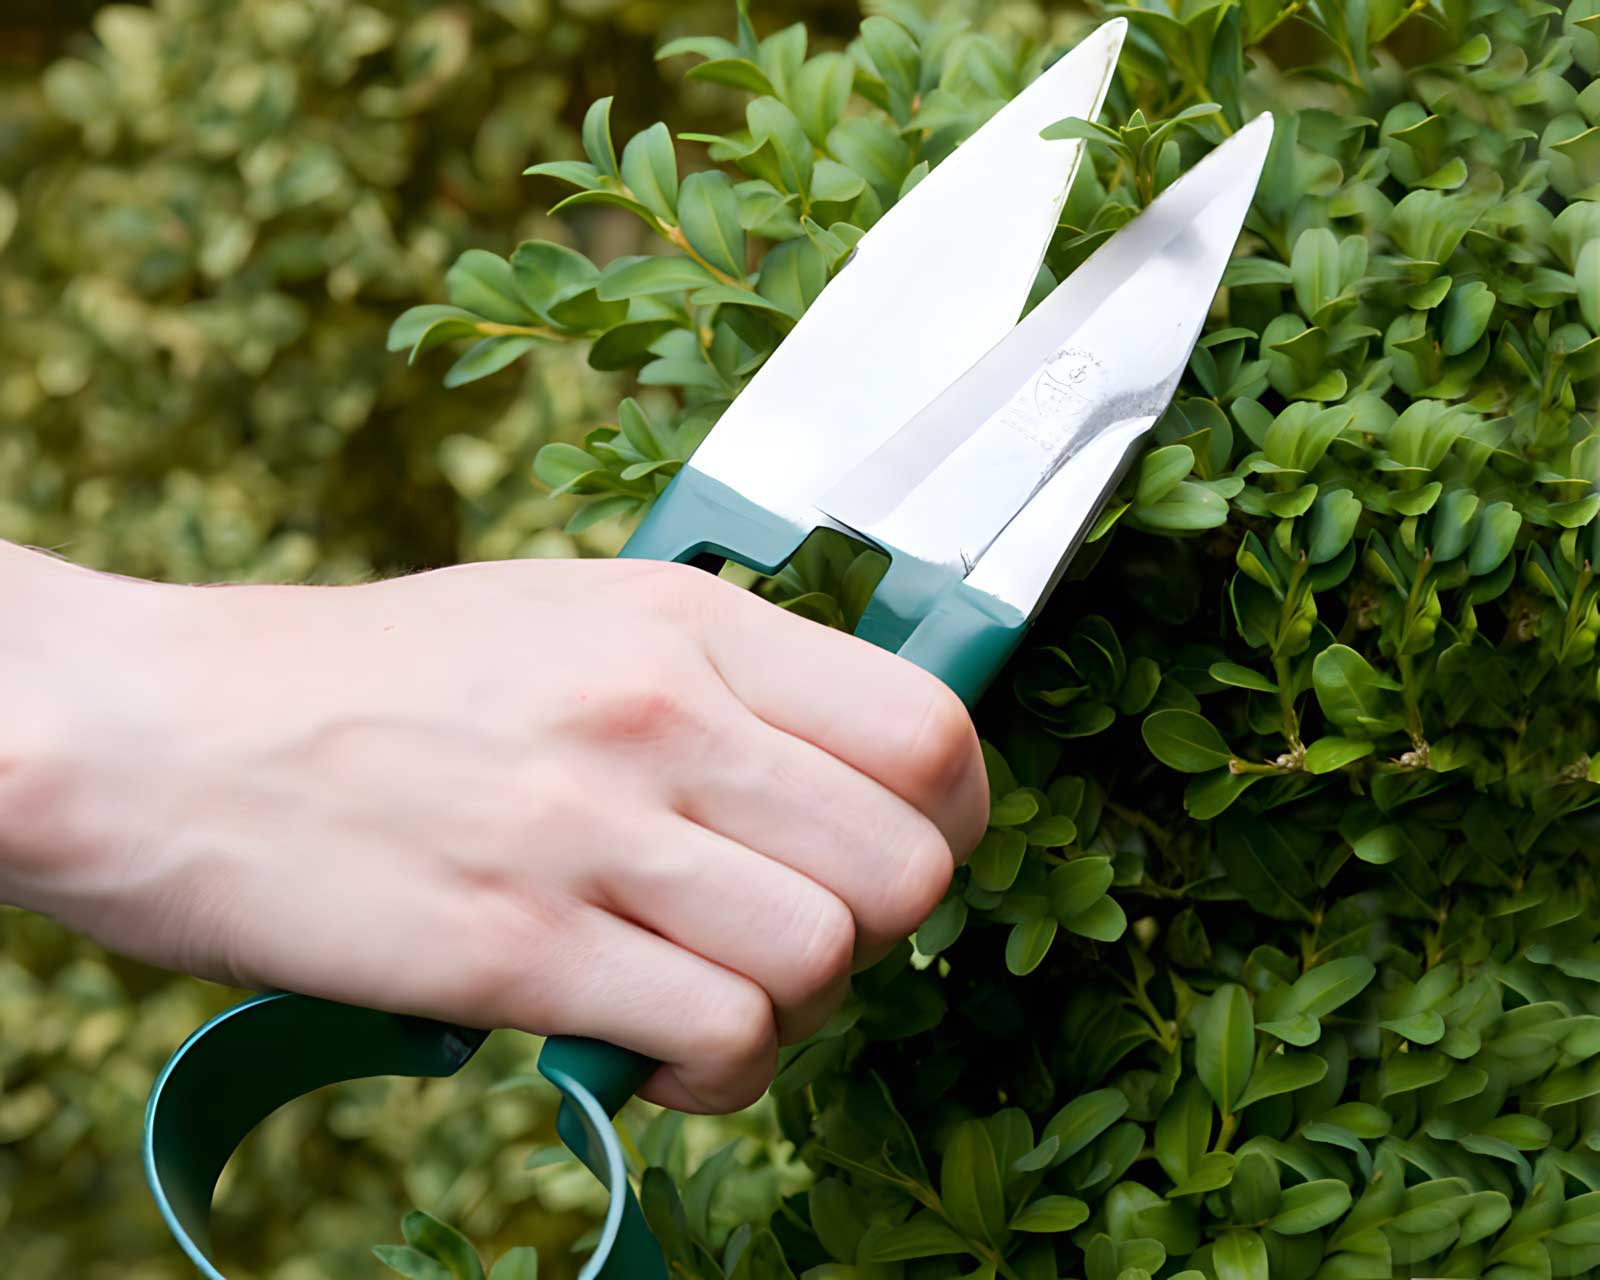 Easy to use topiary trimming shears